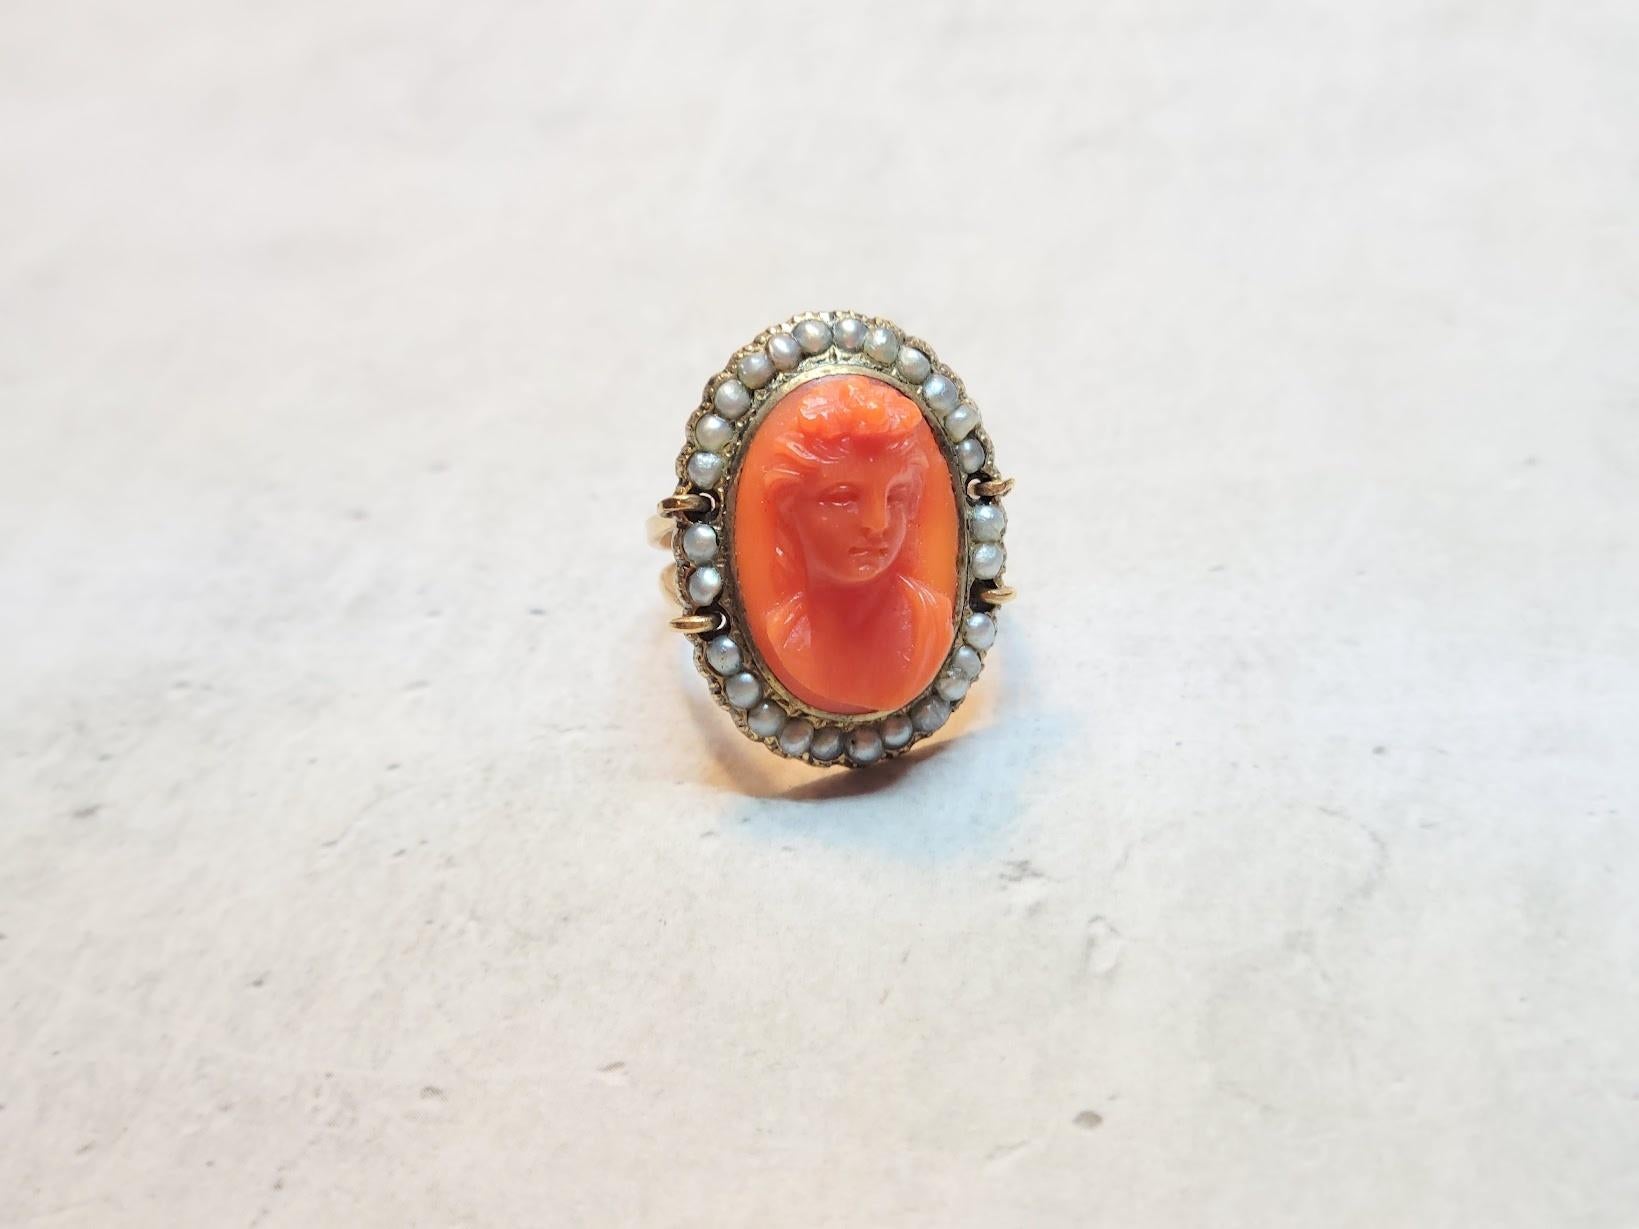 This charming 14kt yellow gold ring centers upon a genuine Mediterranean carved coral. The coral has been meticulously hand-carved and is surrounded by genuine seed pearls. The coral has beautiful color and richness and very high quality carving.